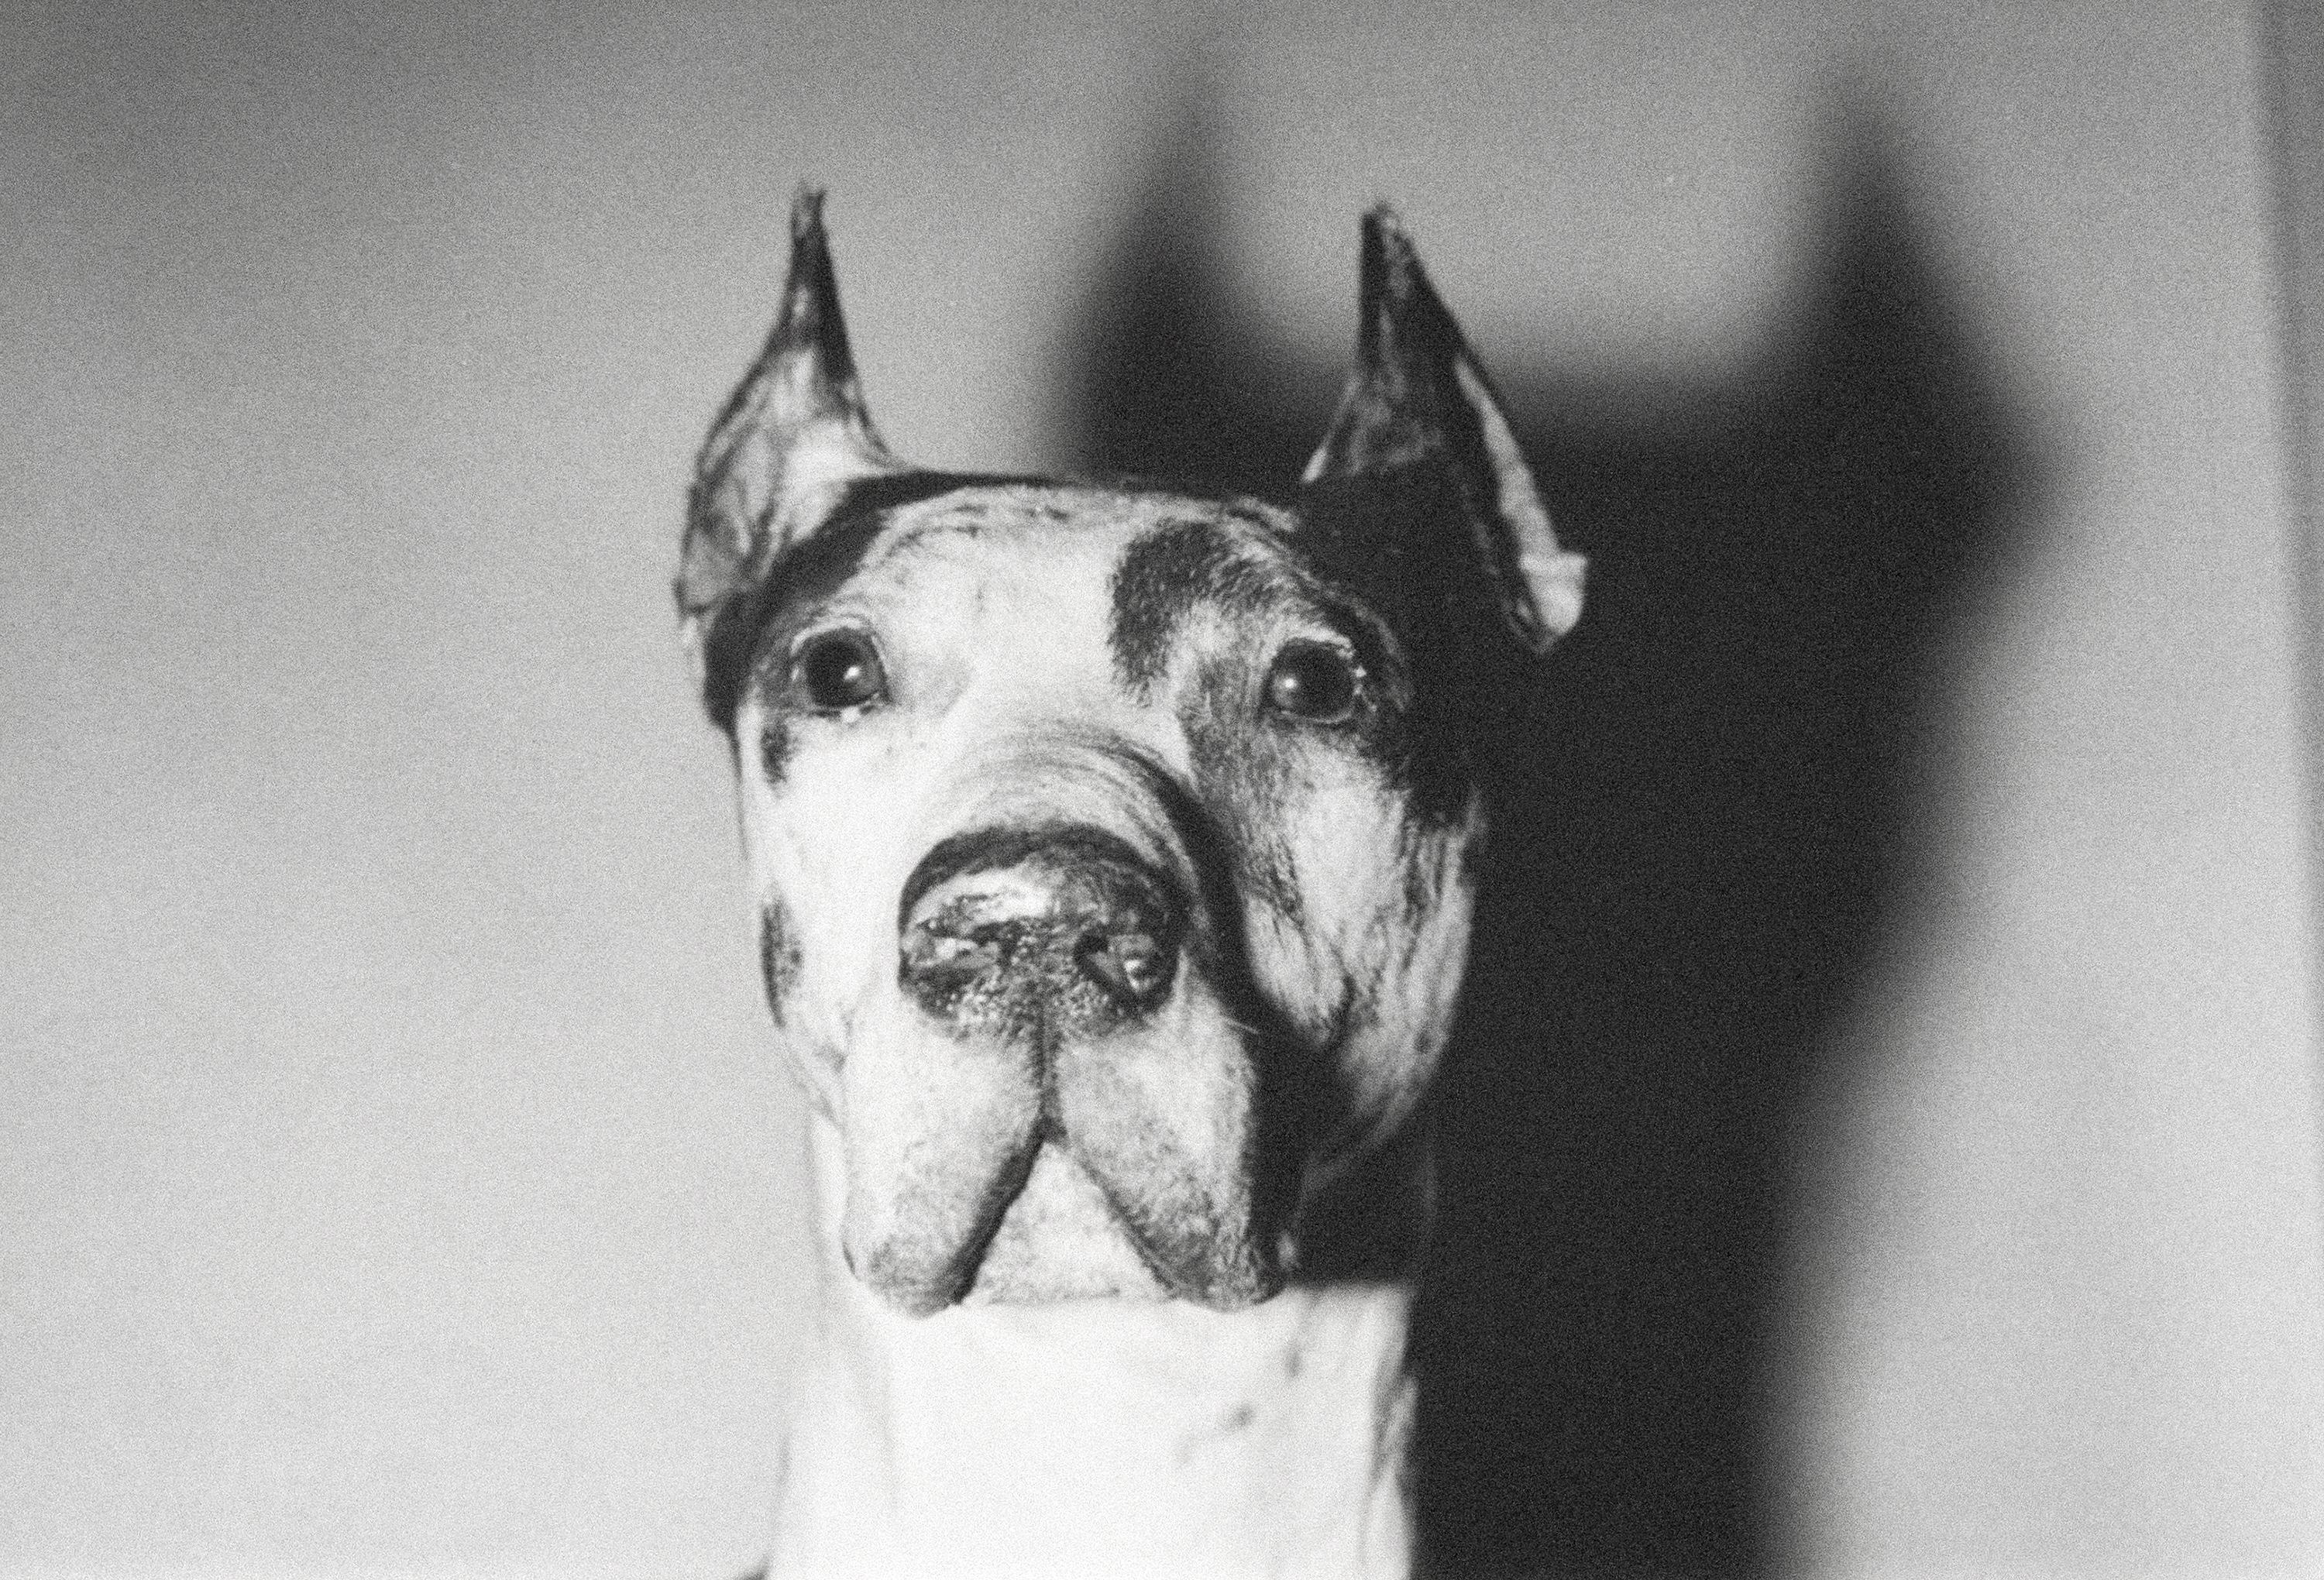 Dogs - Photograph by Andy Warhol